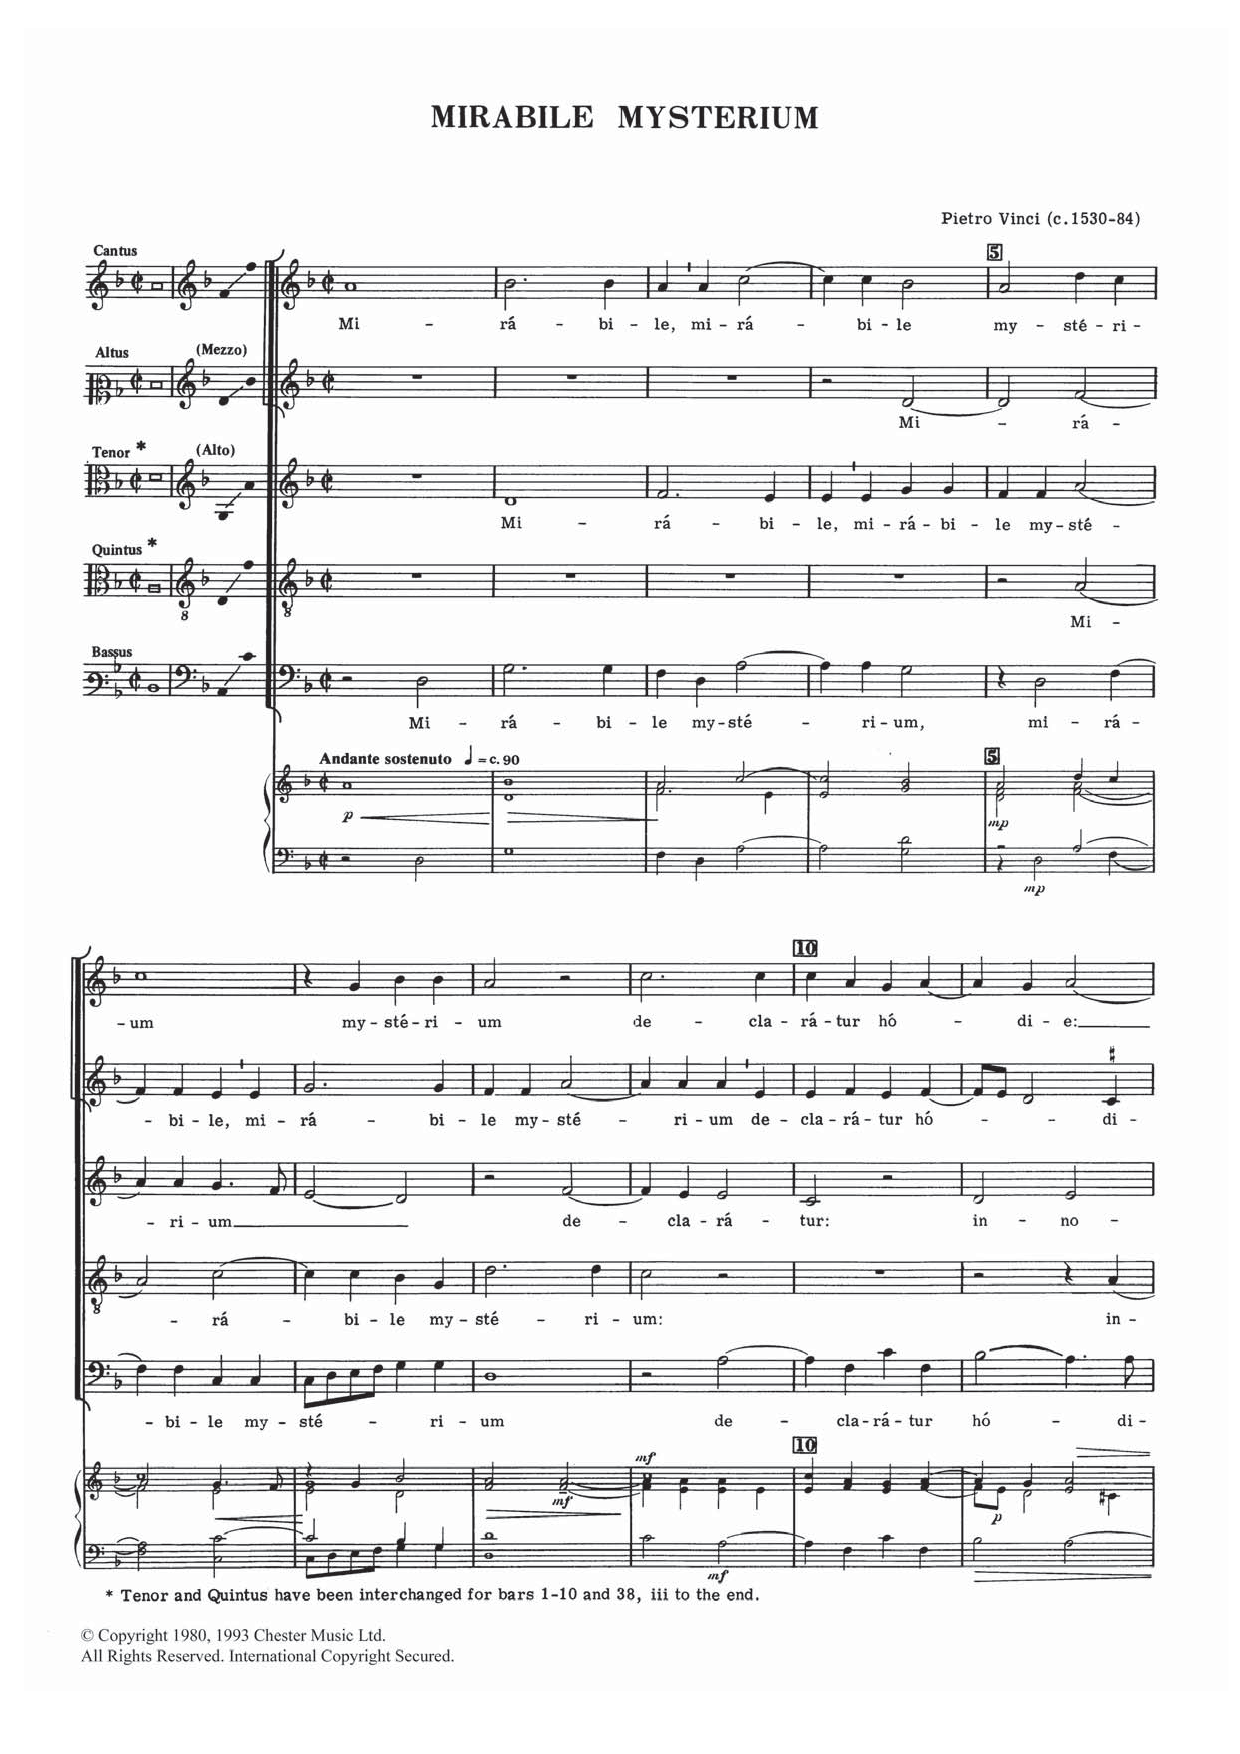 Pietro Vinci Mirabile Mysterium sheet music notes and chords. Download Printable PDF.